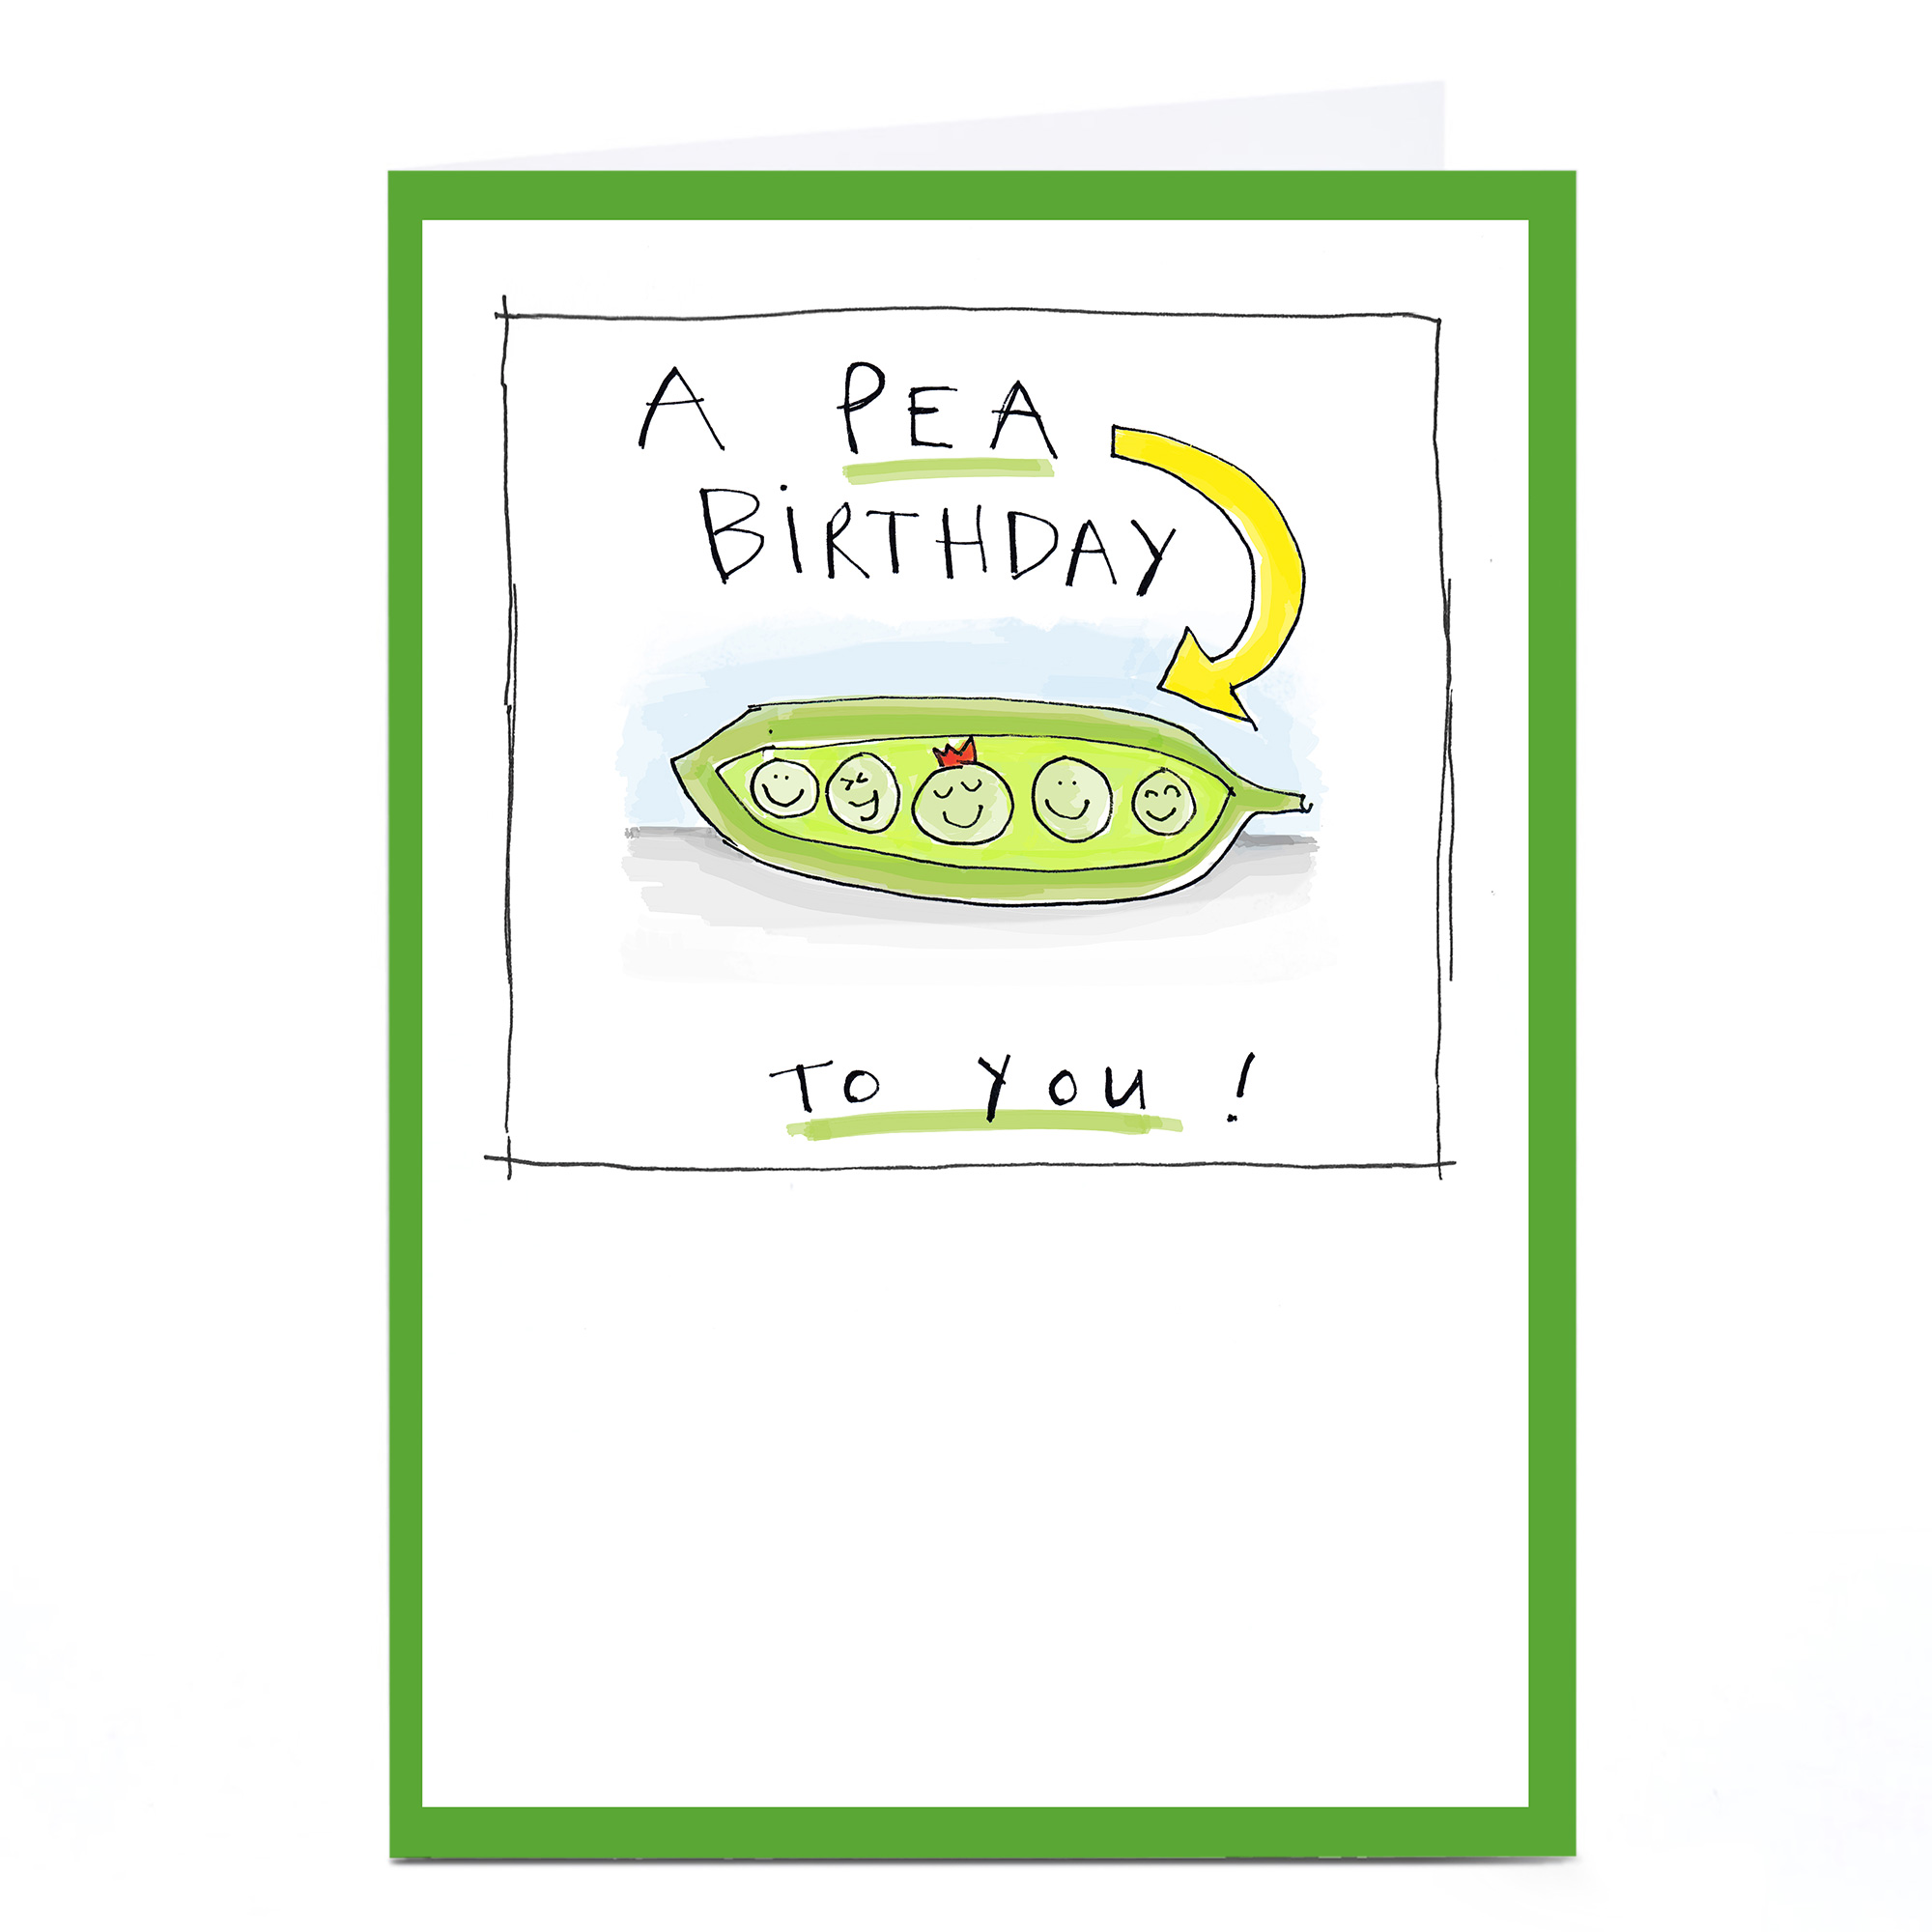 Personalised Vicar Of Scribbly Card - A Pea Birthday!